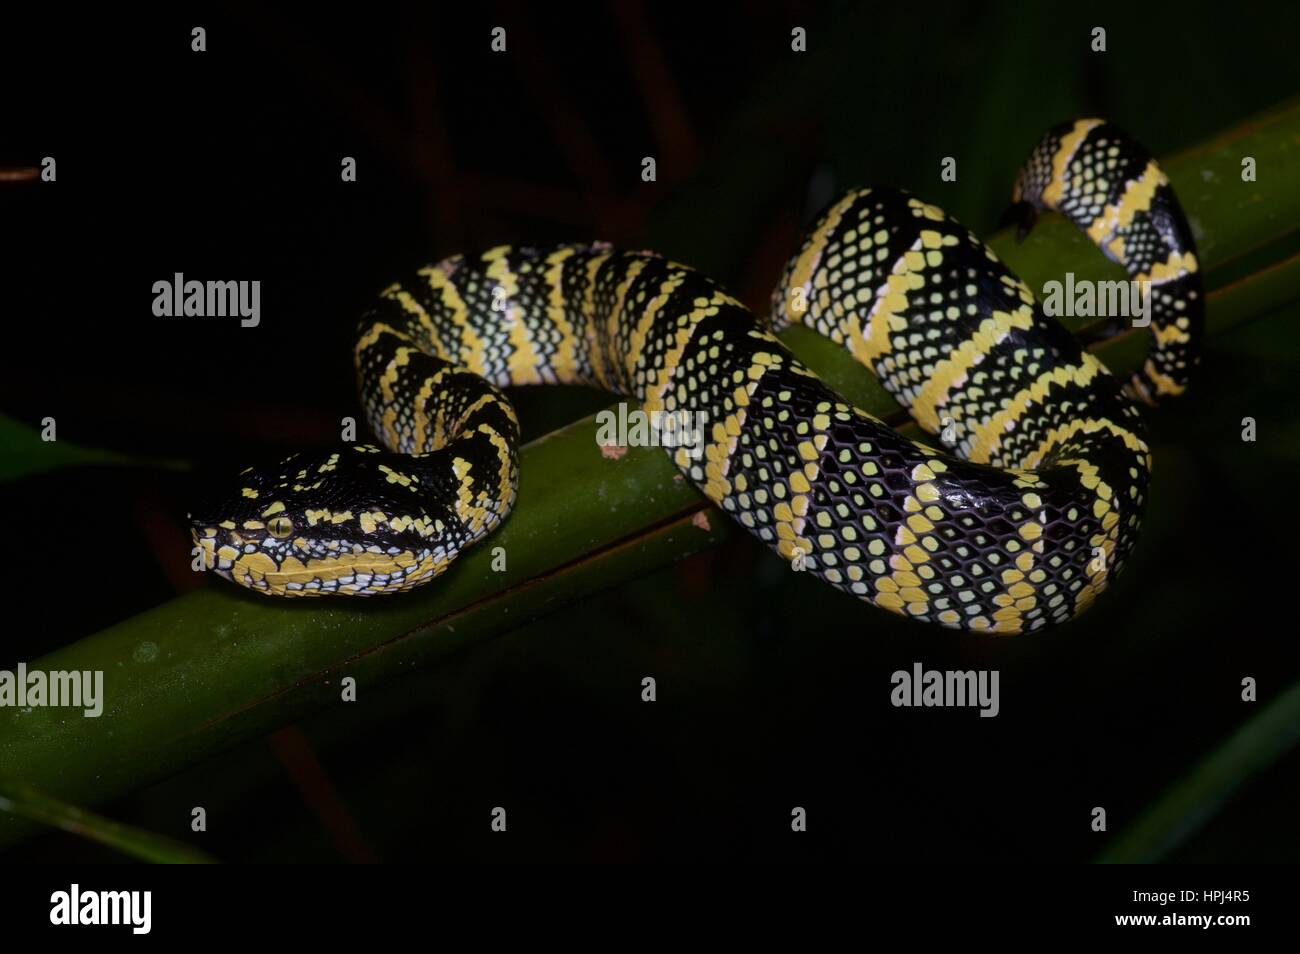 An adult female Wagler's Pit Viper (Tropidolaemus wagleri) on a branch in the rainforest at night in Ulu Semenyih, Selangor, Malaysia Stock Photo